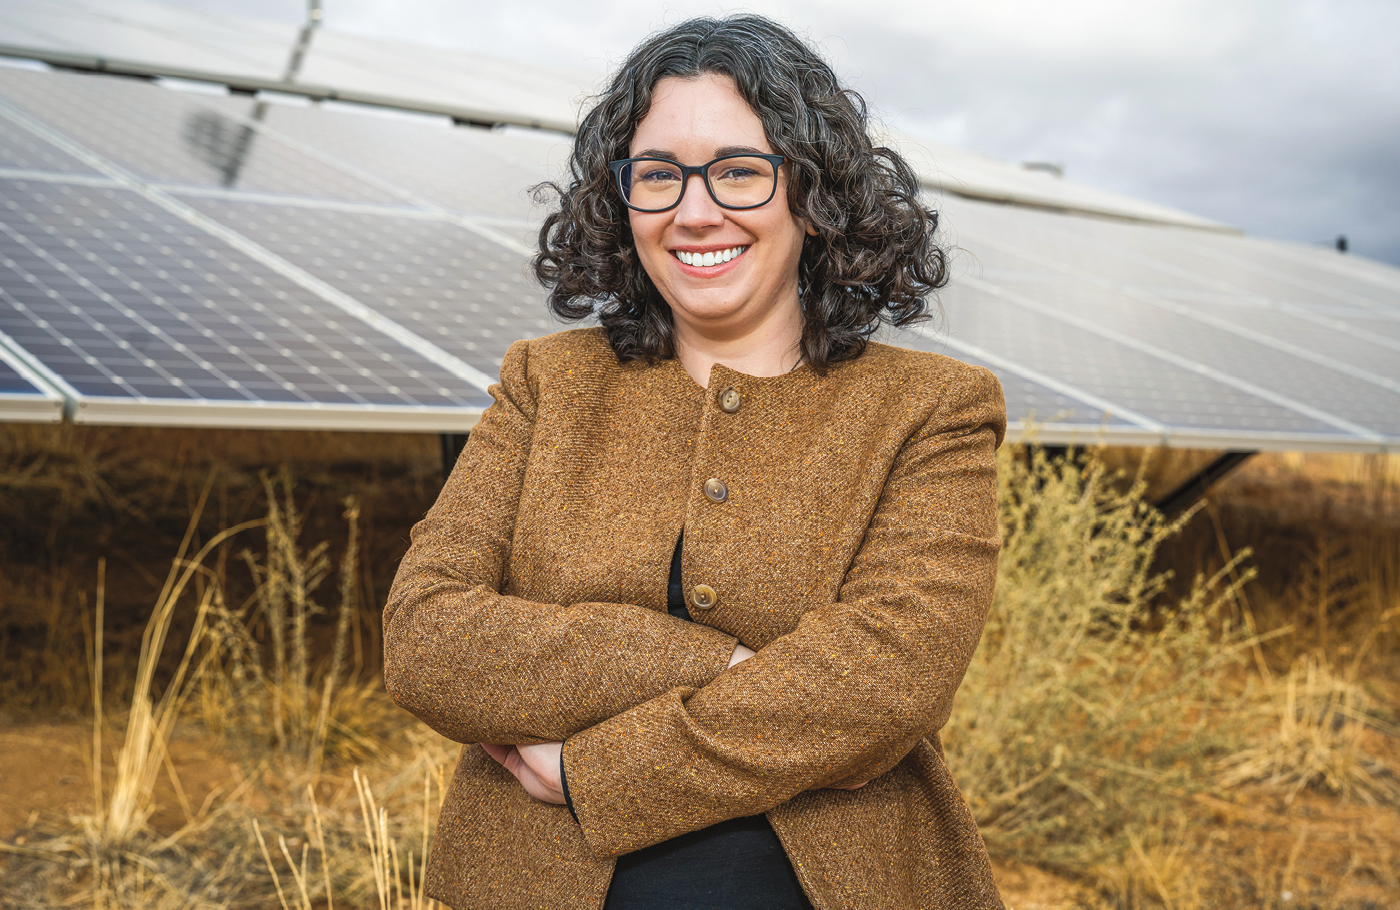 A woman with curly brown-gray shoulder length hair in front of a solar panel on a field wearing a brown jacket